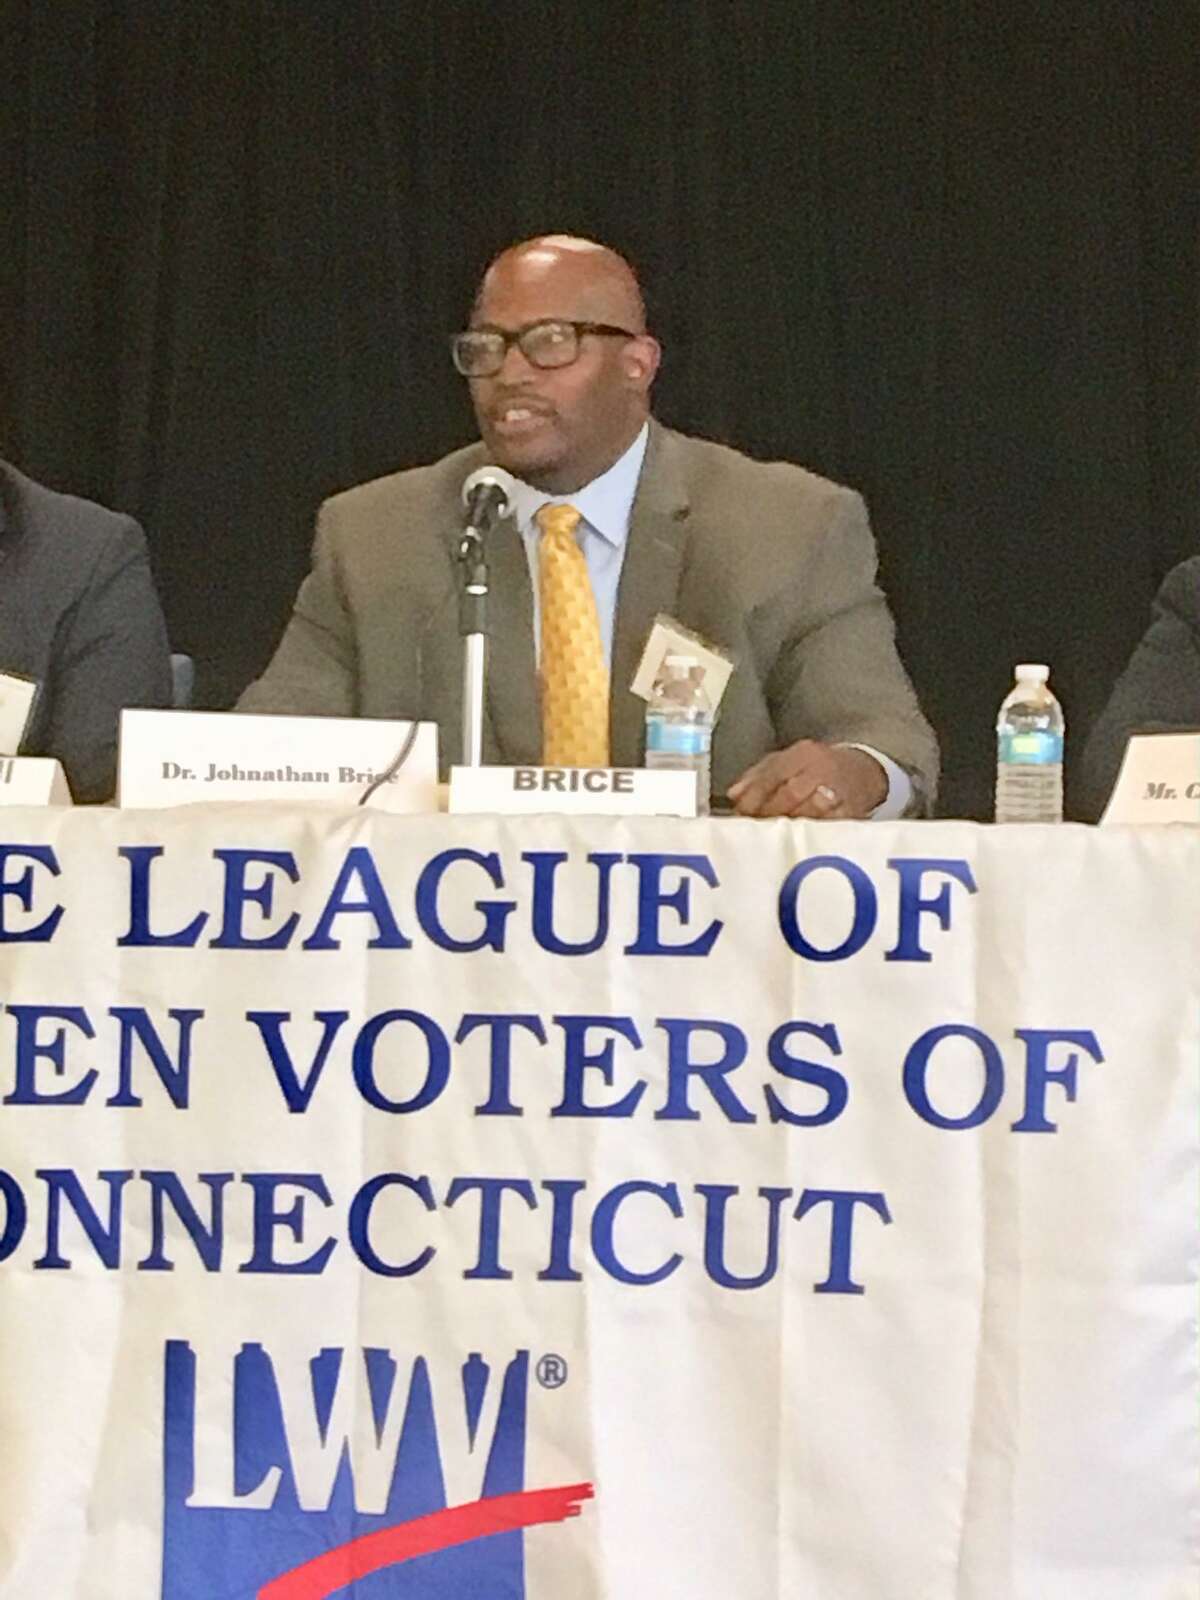 Jonathan Brice, a candidate for Interim Superintendent of Schools at a League of Women Voters Forum held at Claytor School in Bridgeport. June 22, 2019